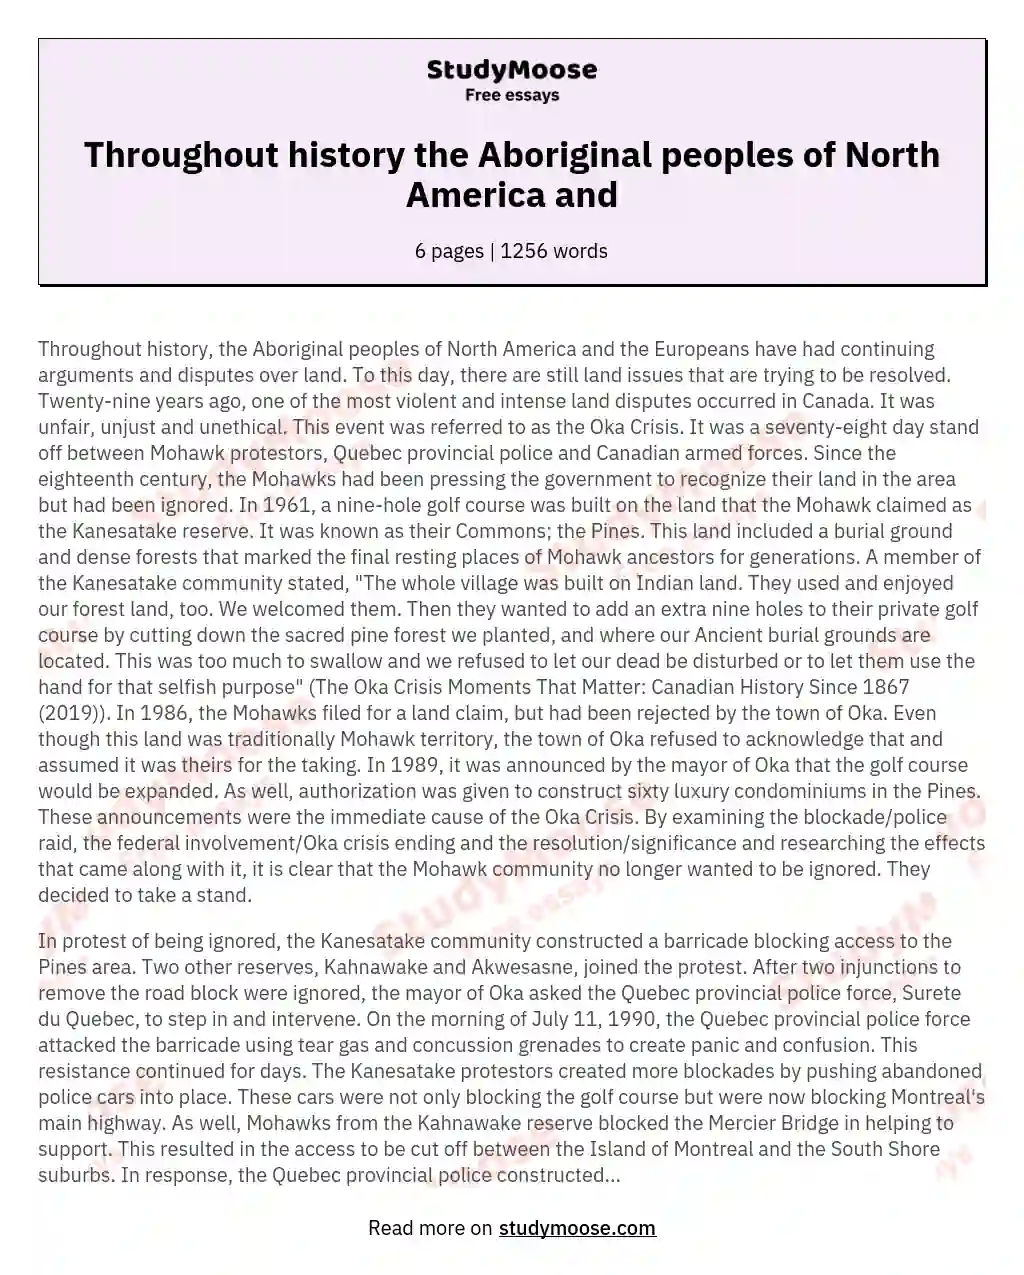 Throughout history the Aboriginal peoples of North America and